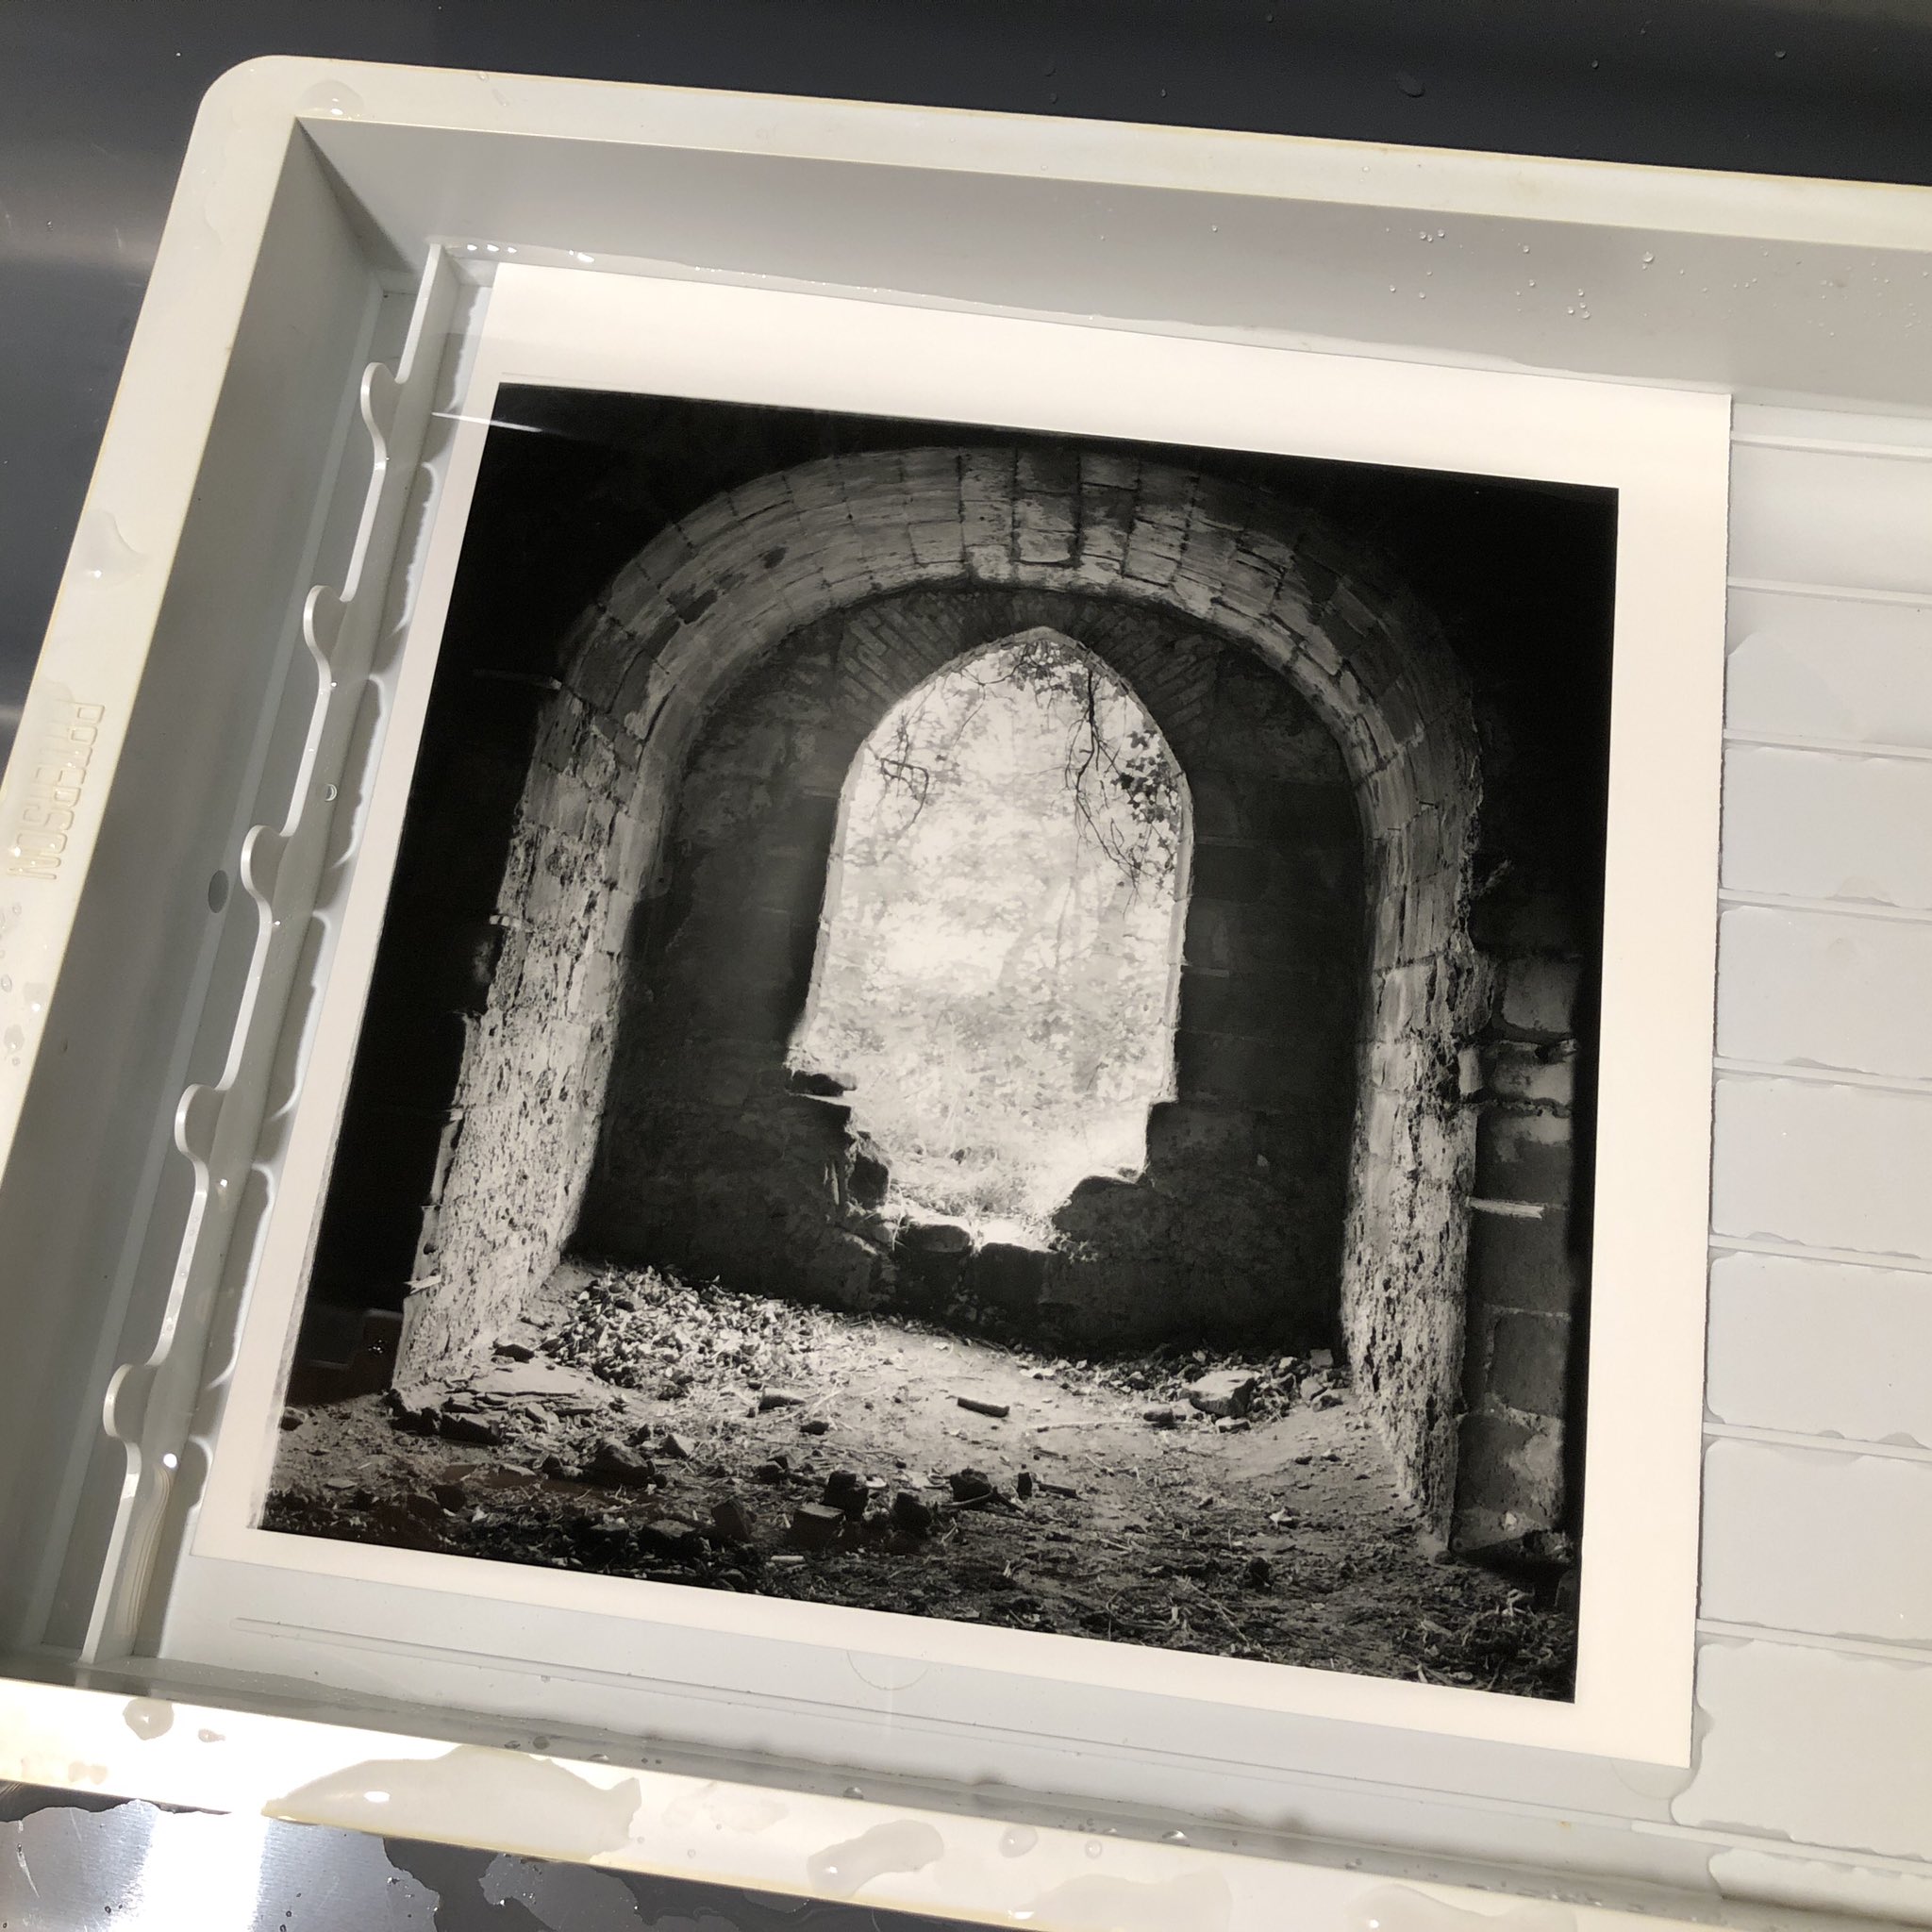 @JamesPearson #splitgradeprint from a tricky to print negative. Grade 00 for 38s and grade 1 for 11s. Then two minutes burning of the window (that was hard work). @ILFORDPhoto MG FB Classic